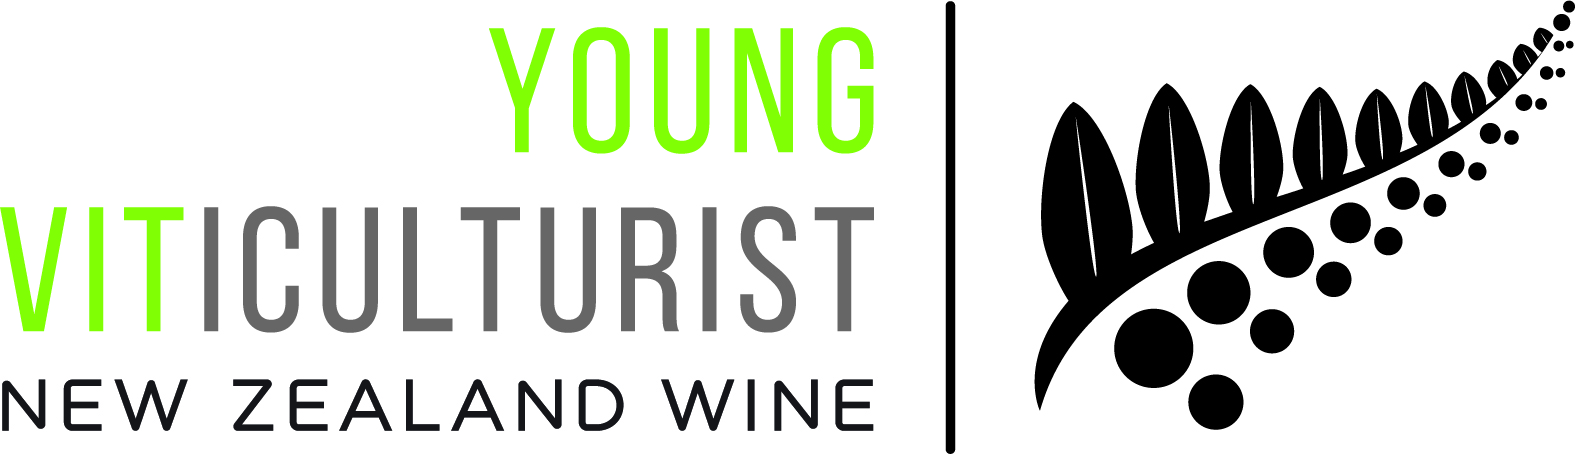 Young Viticulturist logo